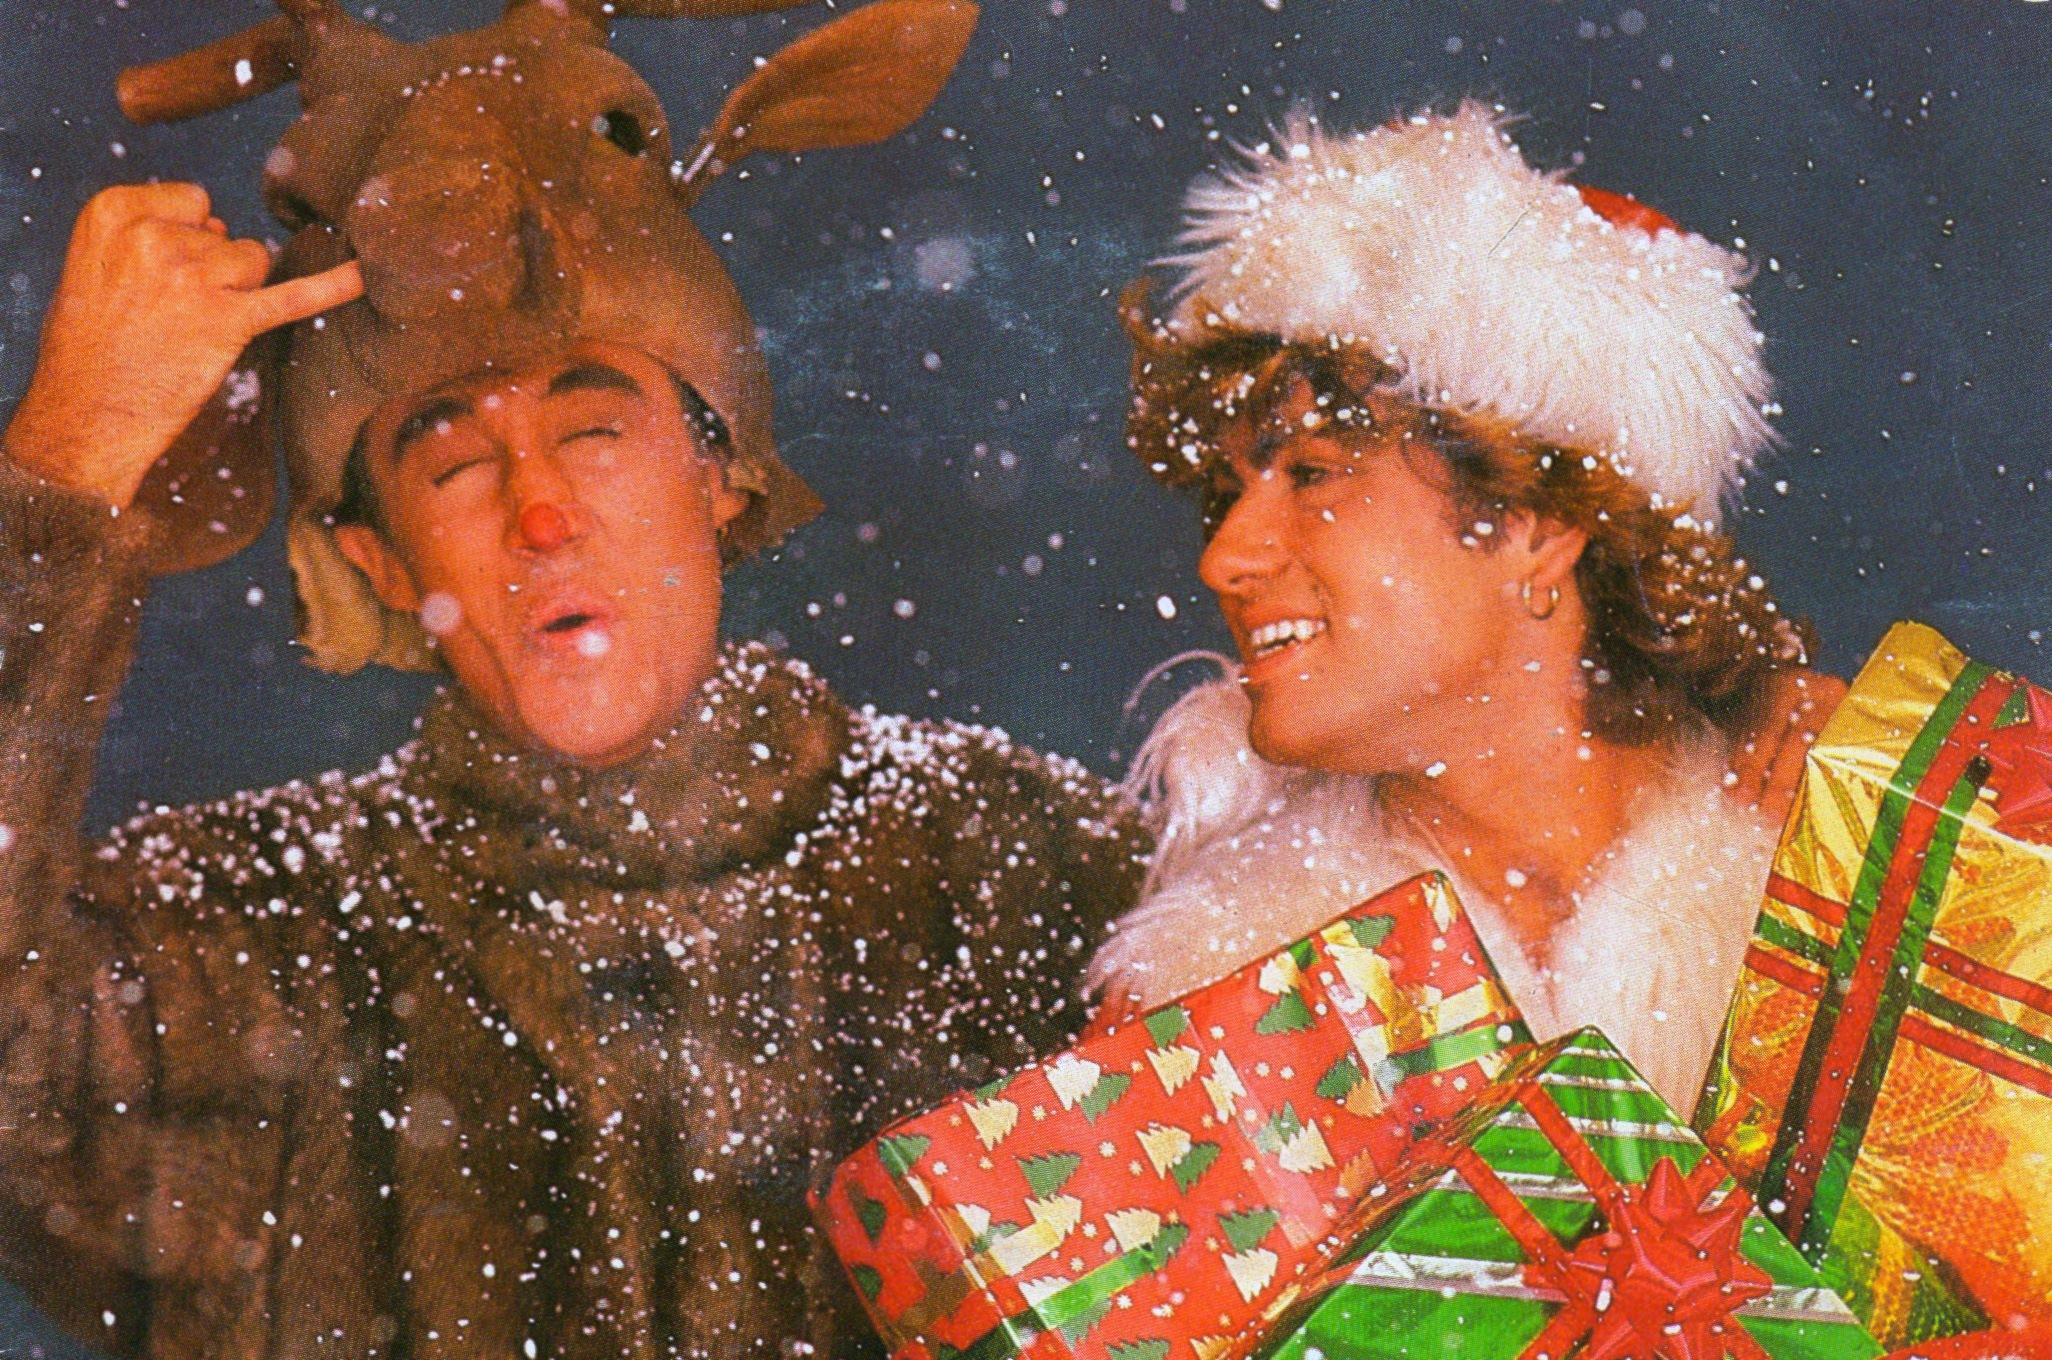 20 "Weird" Holiday Songs You Love